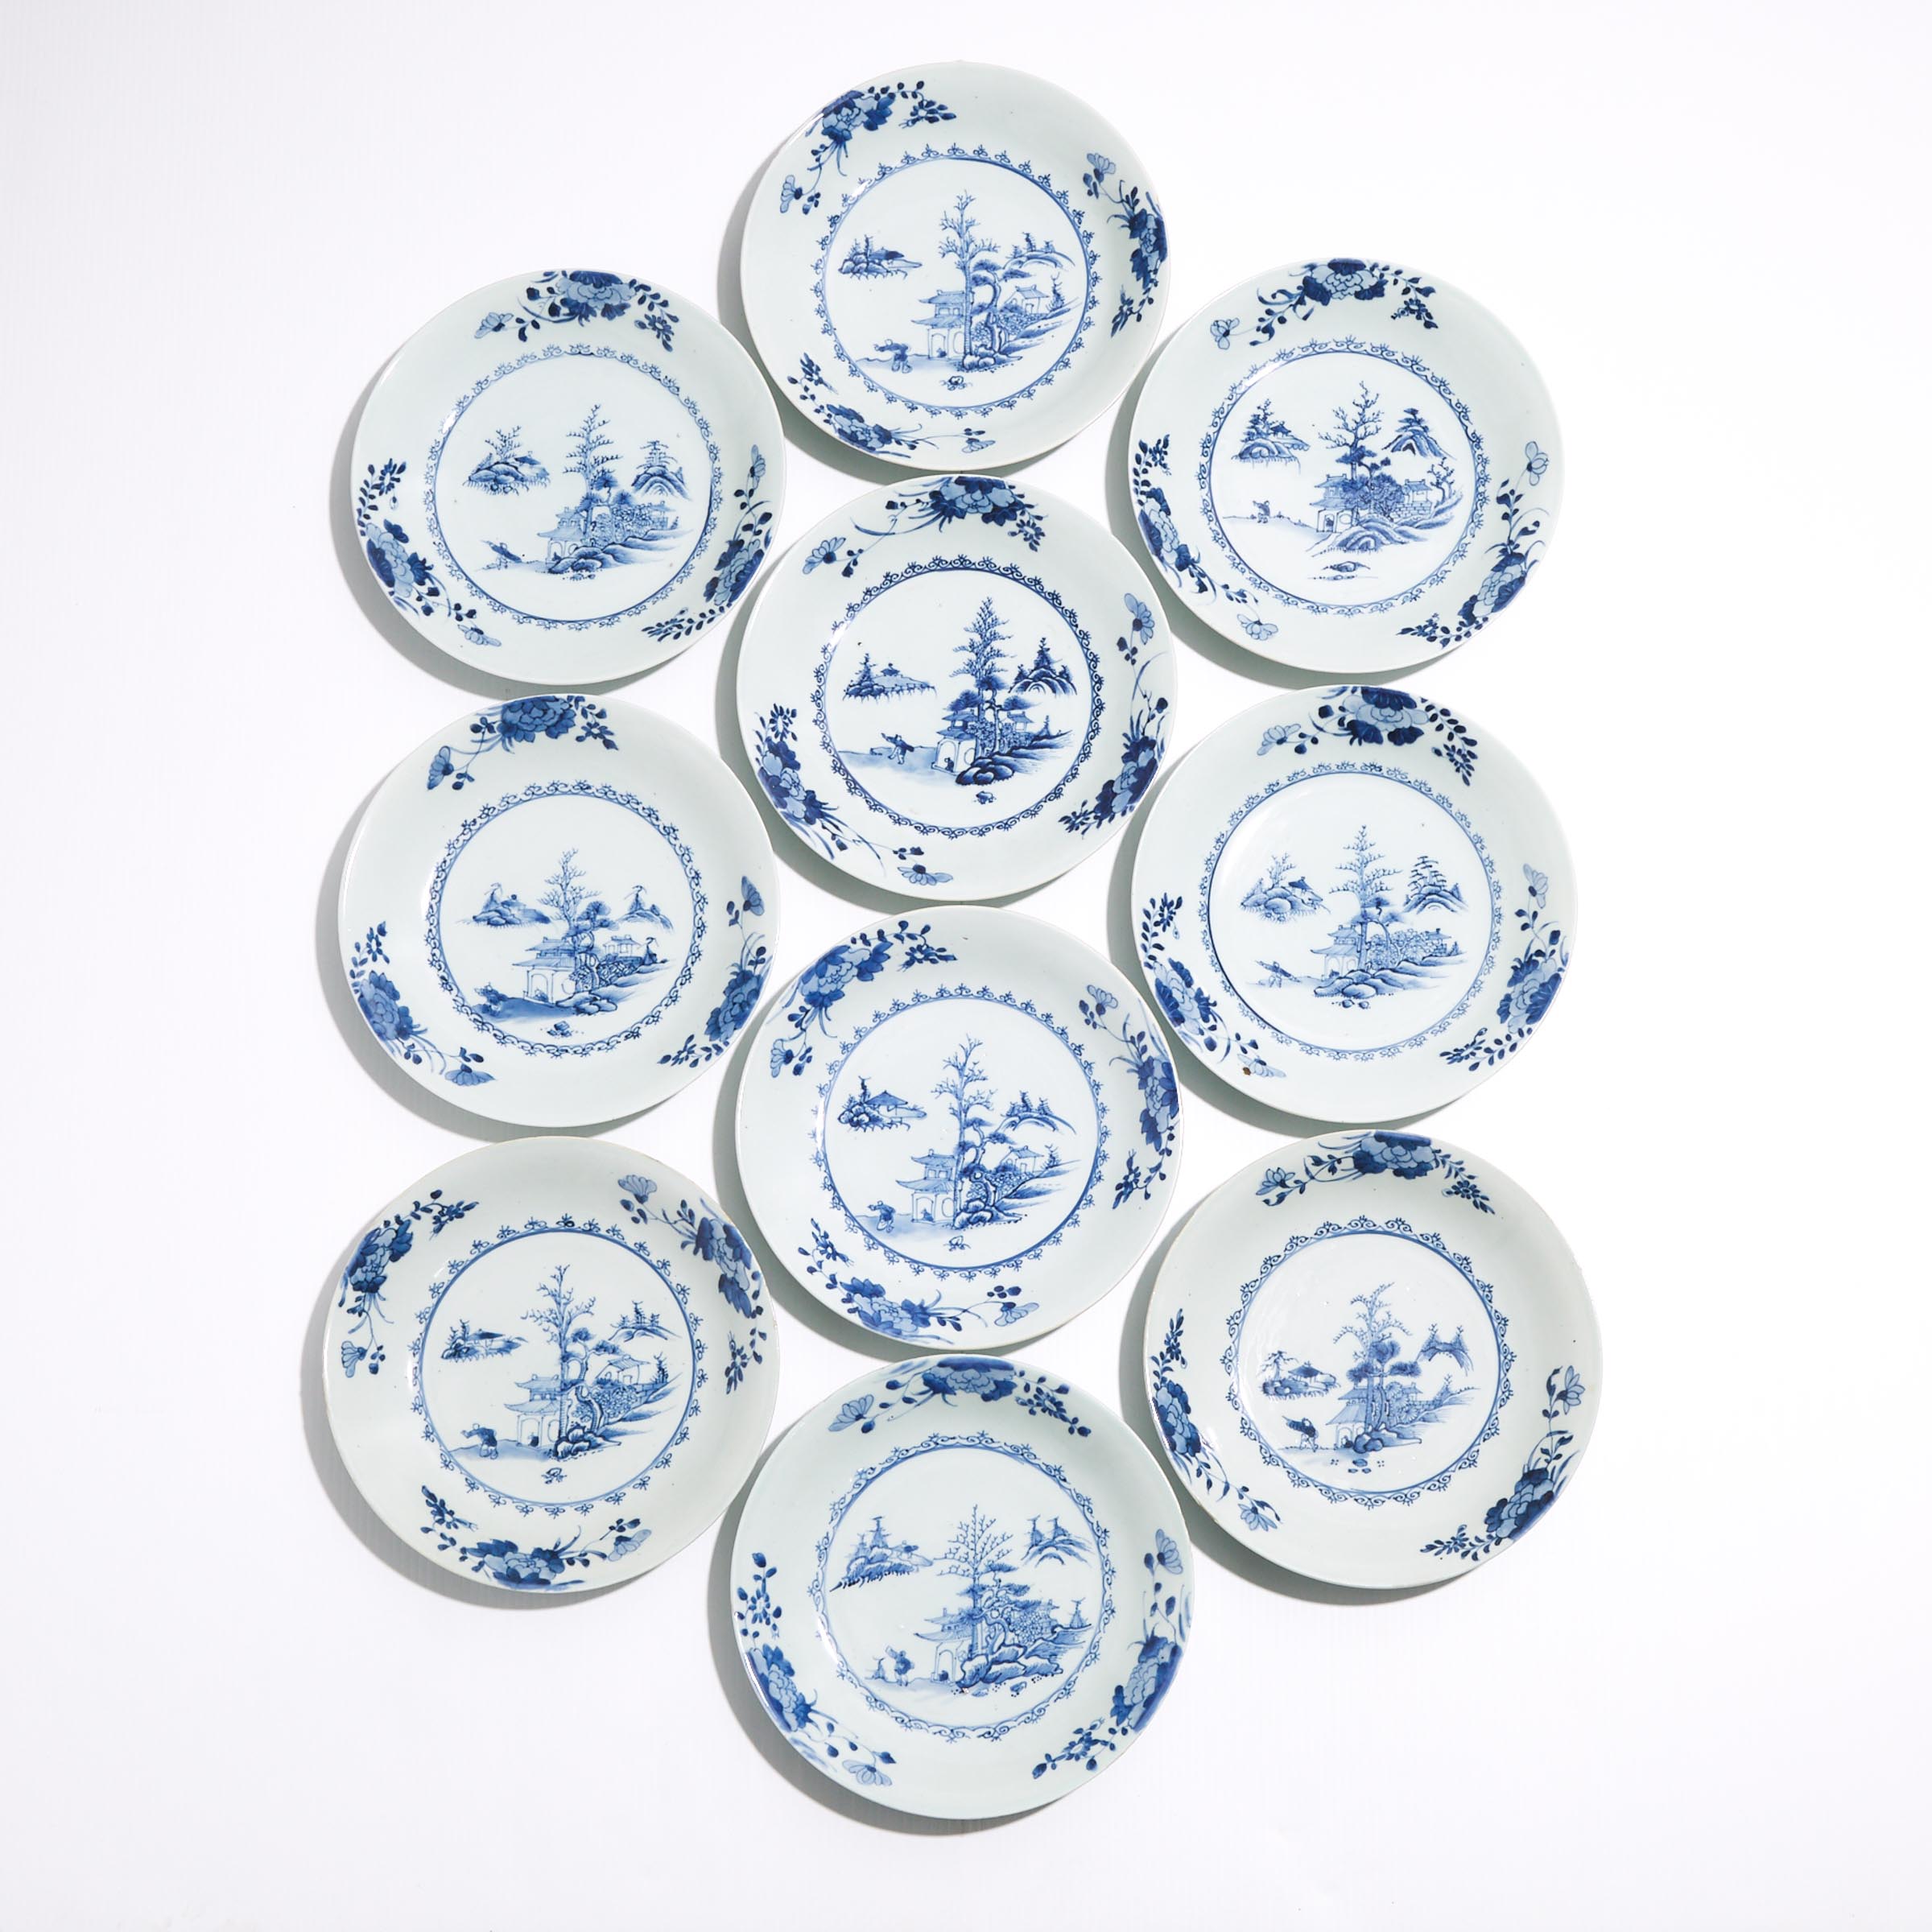 A Set of Ten 'Leaping Boy' Pattern Saucer Dishes from the Nanking Cargo, Qianlong Period, Circa 1750